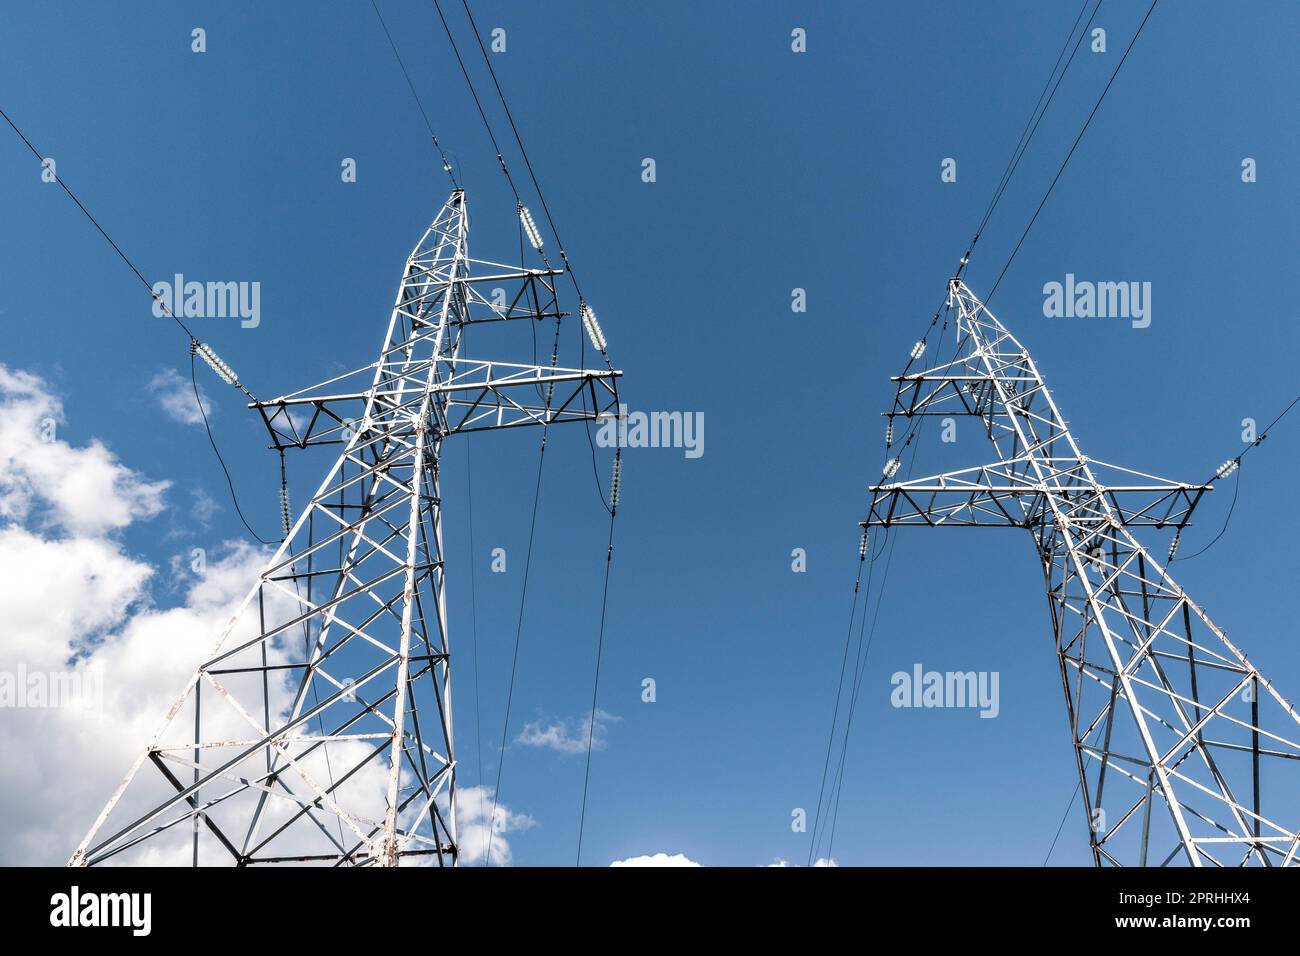 Electricity transmission power lines (High voltage towers) Stock Photo